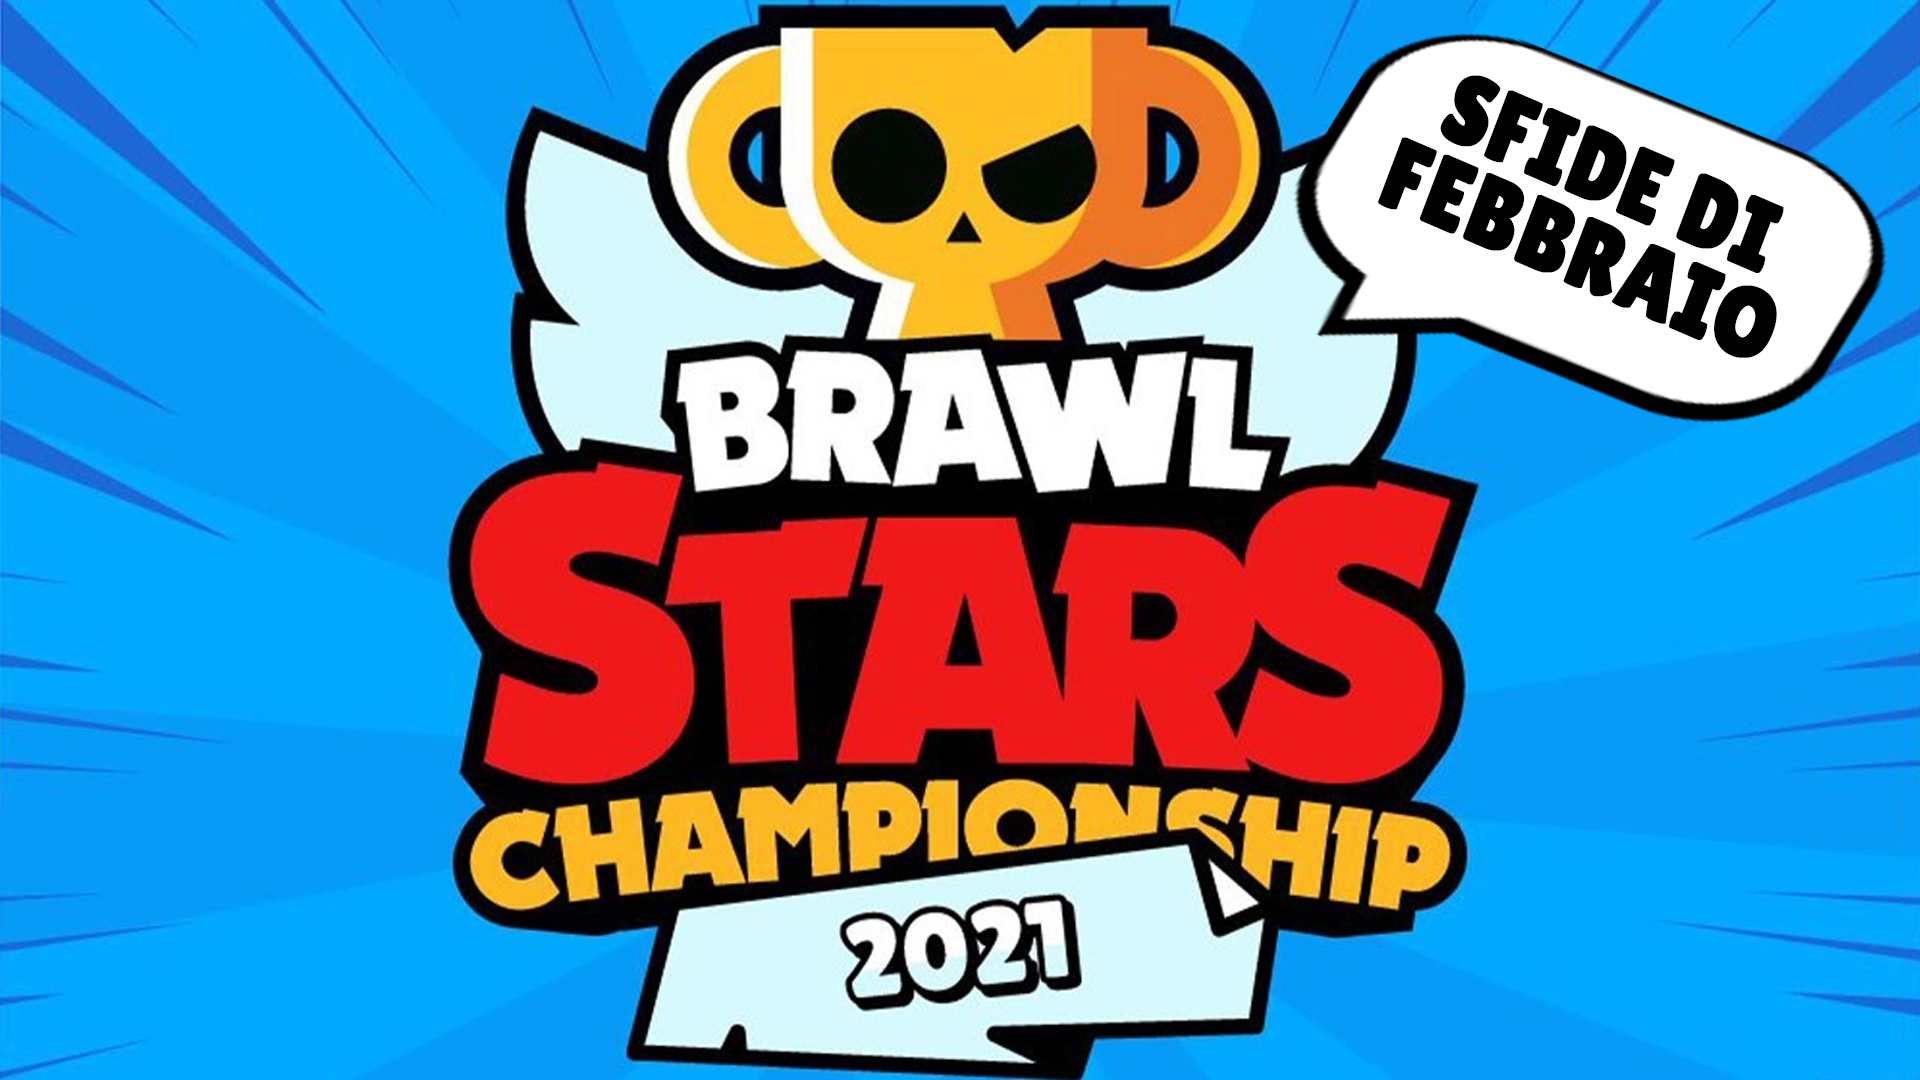 The Maps Of The Monthly Challenge Of February On Brawl Stars - brawl stars update february